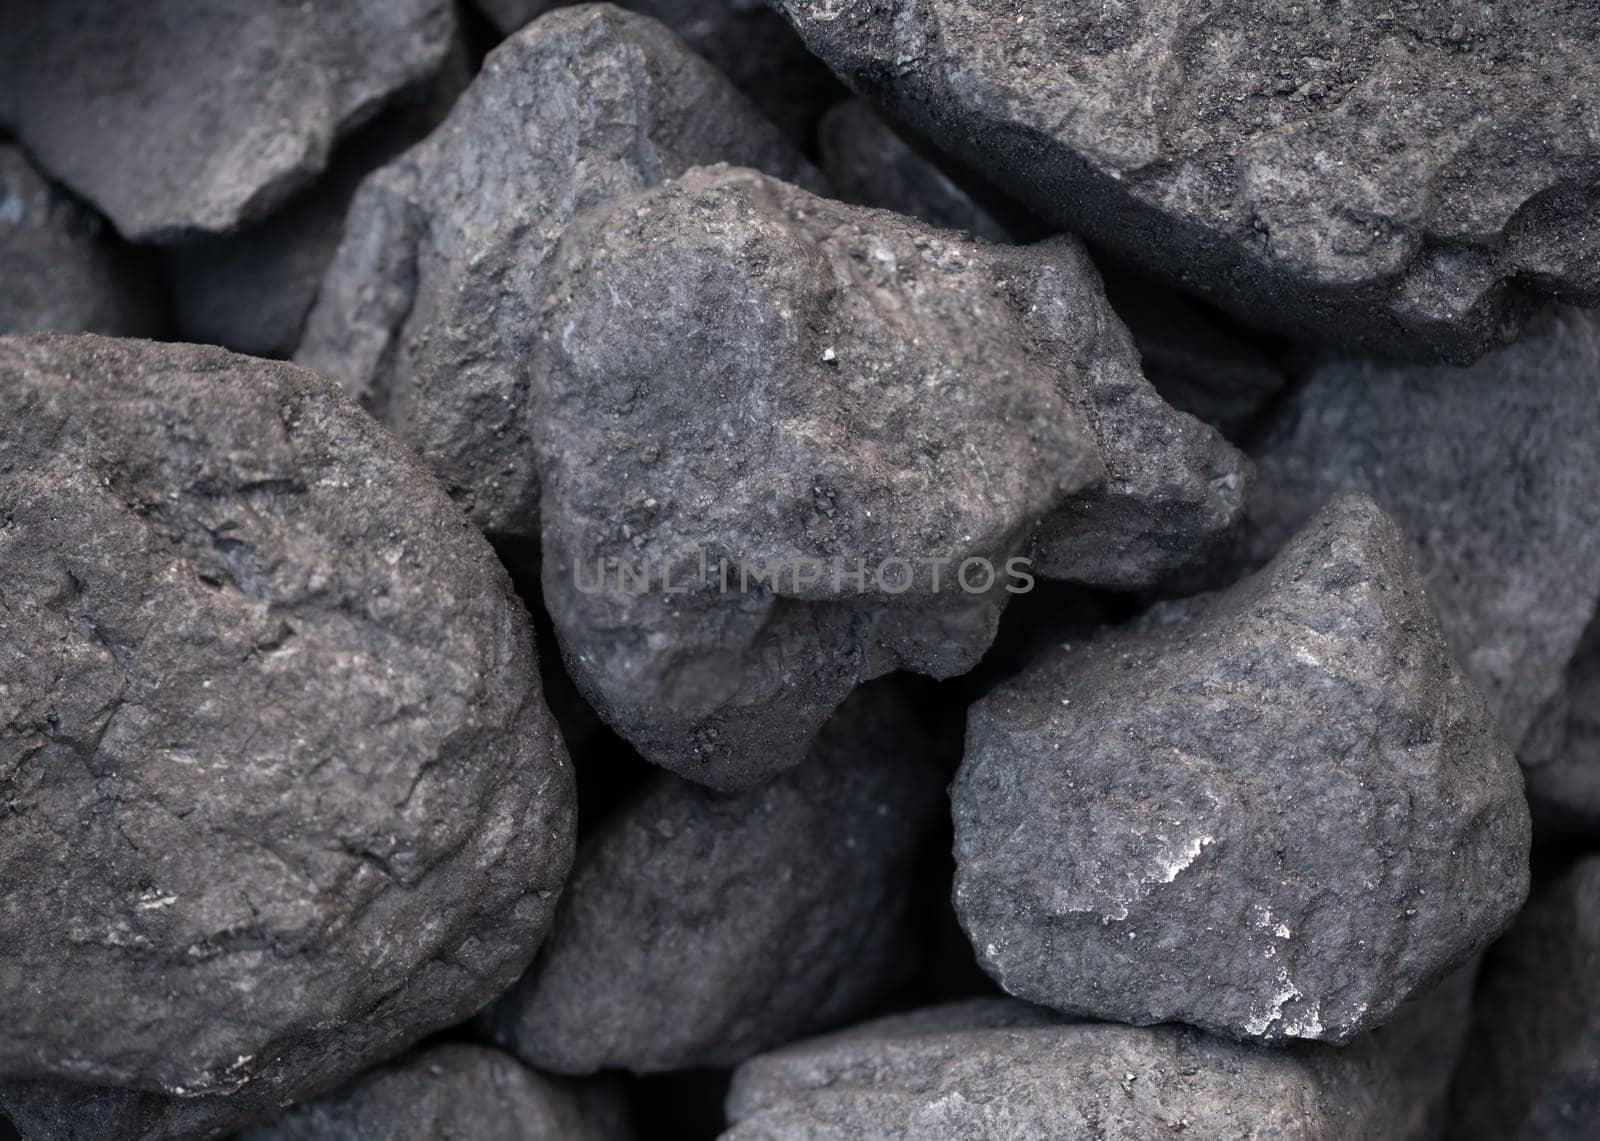 Abstract Background Texture Of Coal, An Irresponsible Fossil Fuel